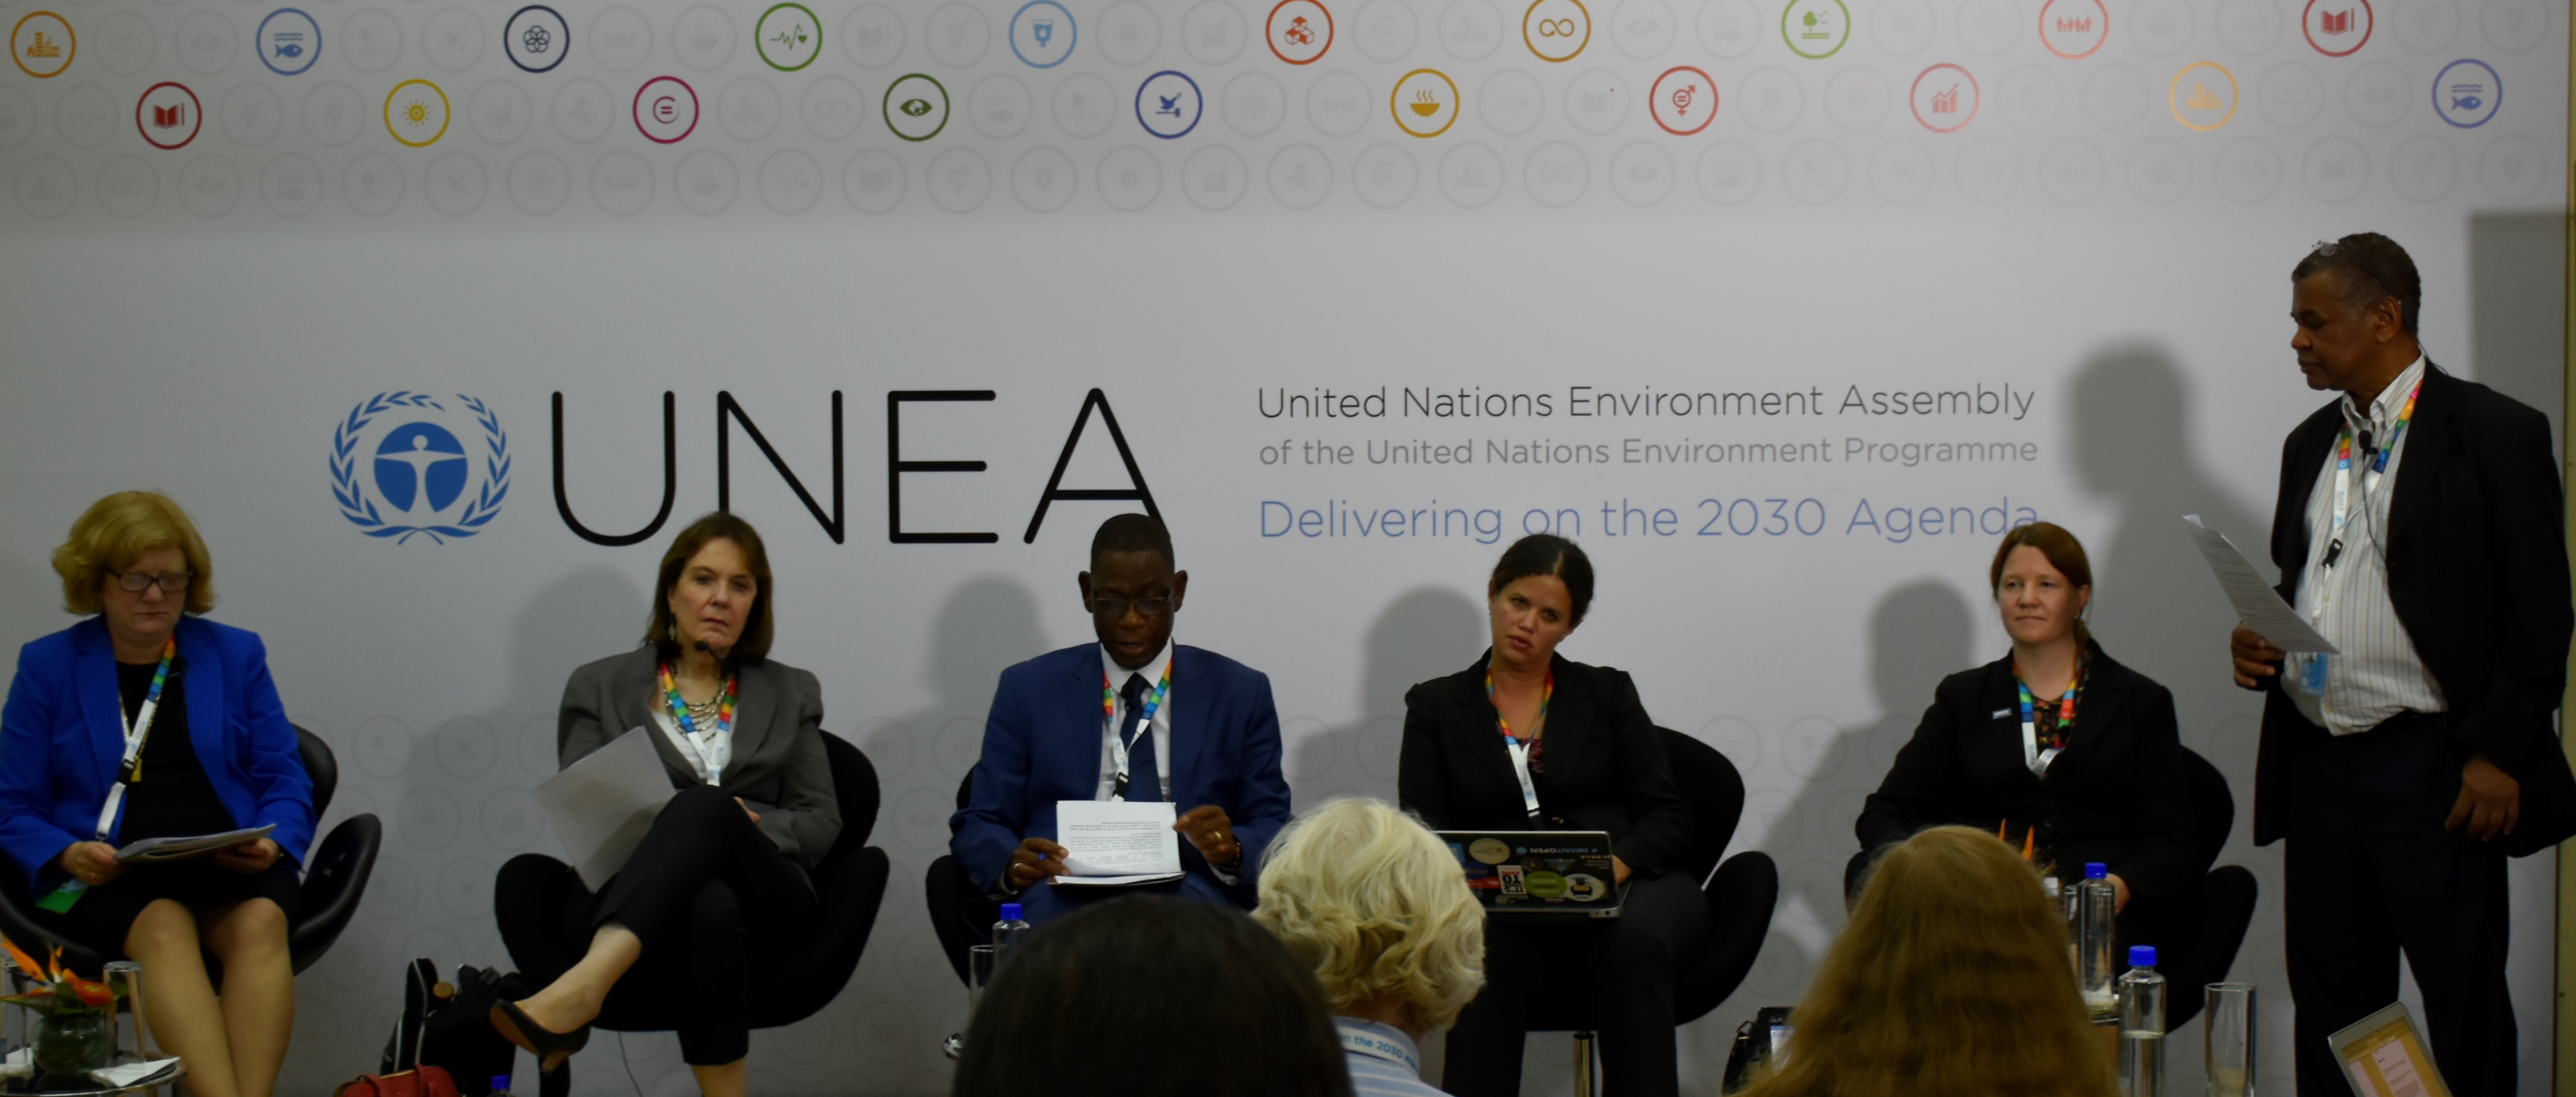 Sara Brosché and other panelists at the UNEA2 side event 